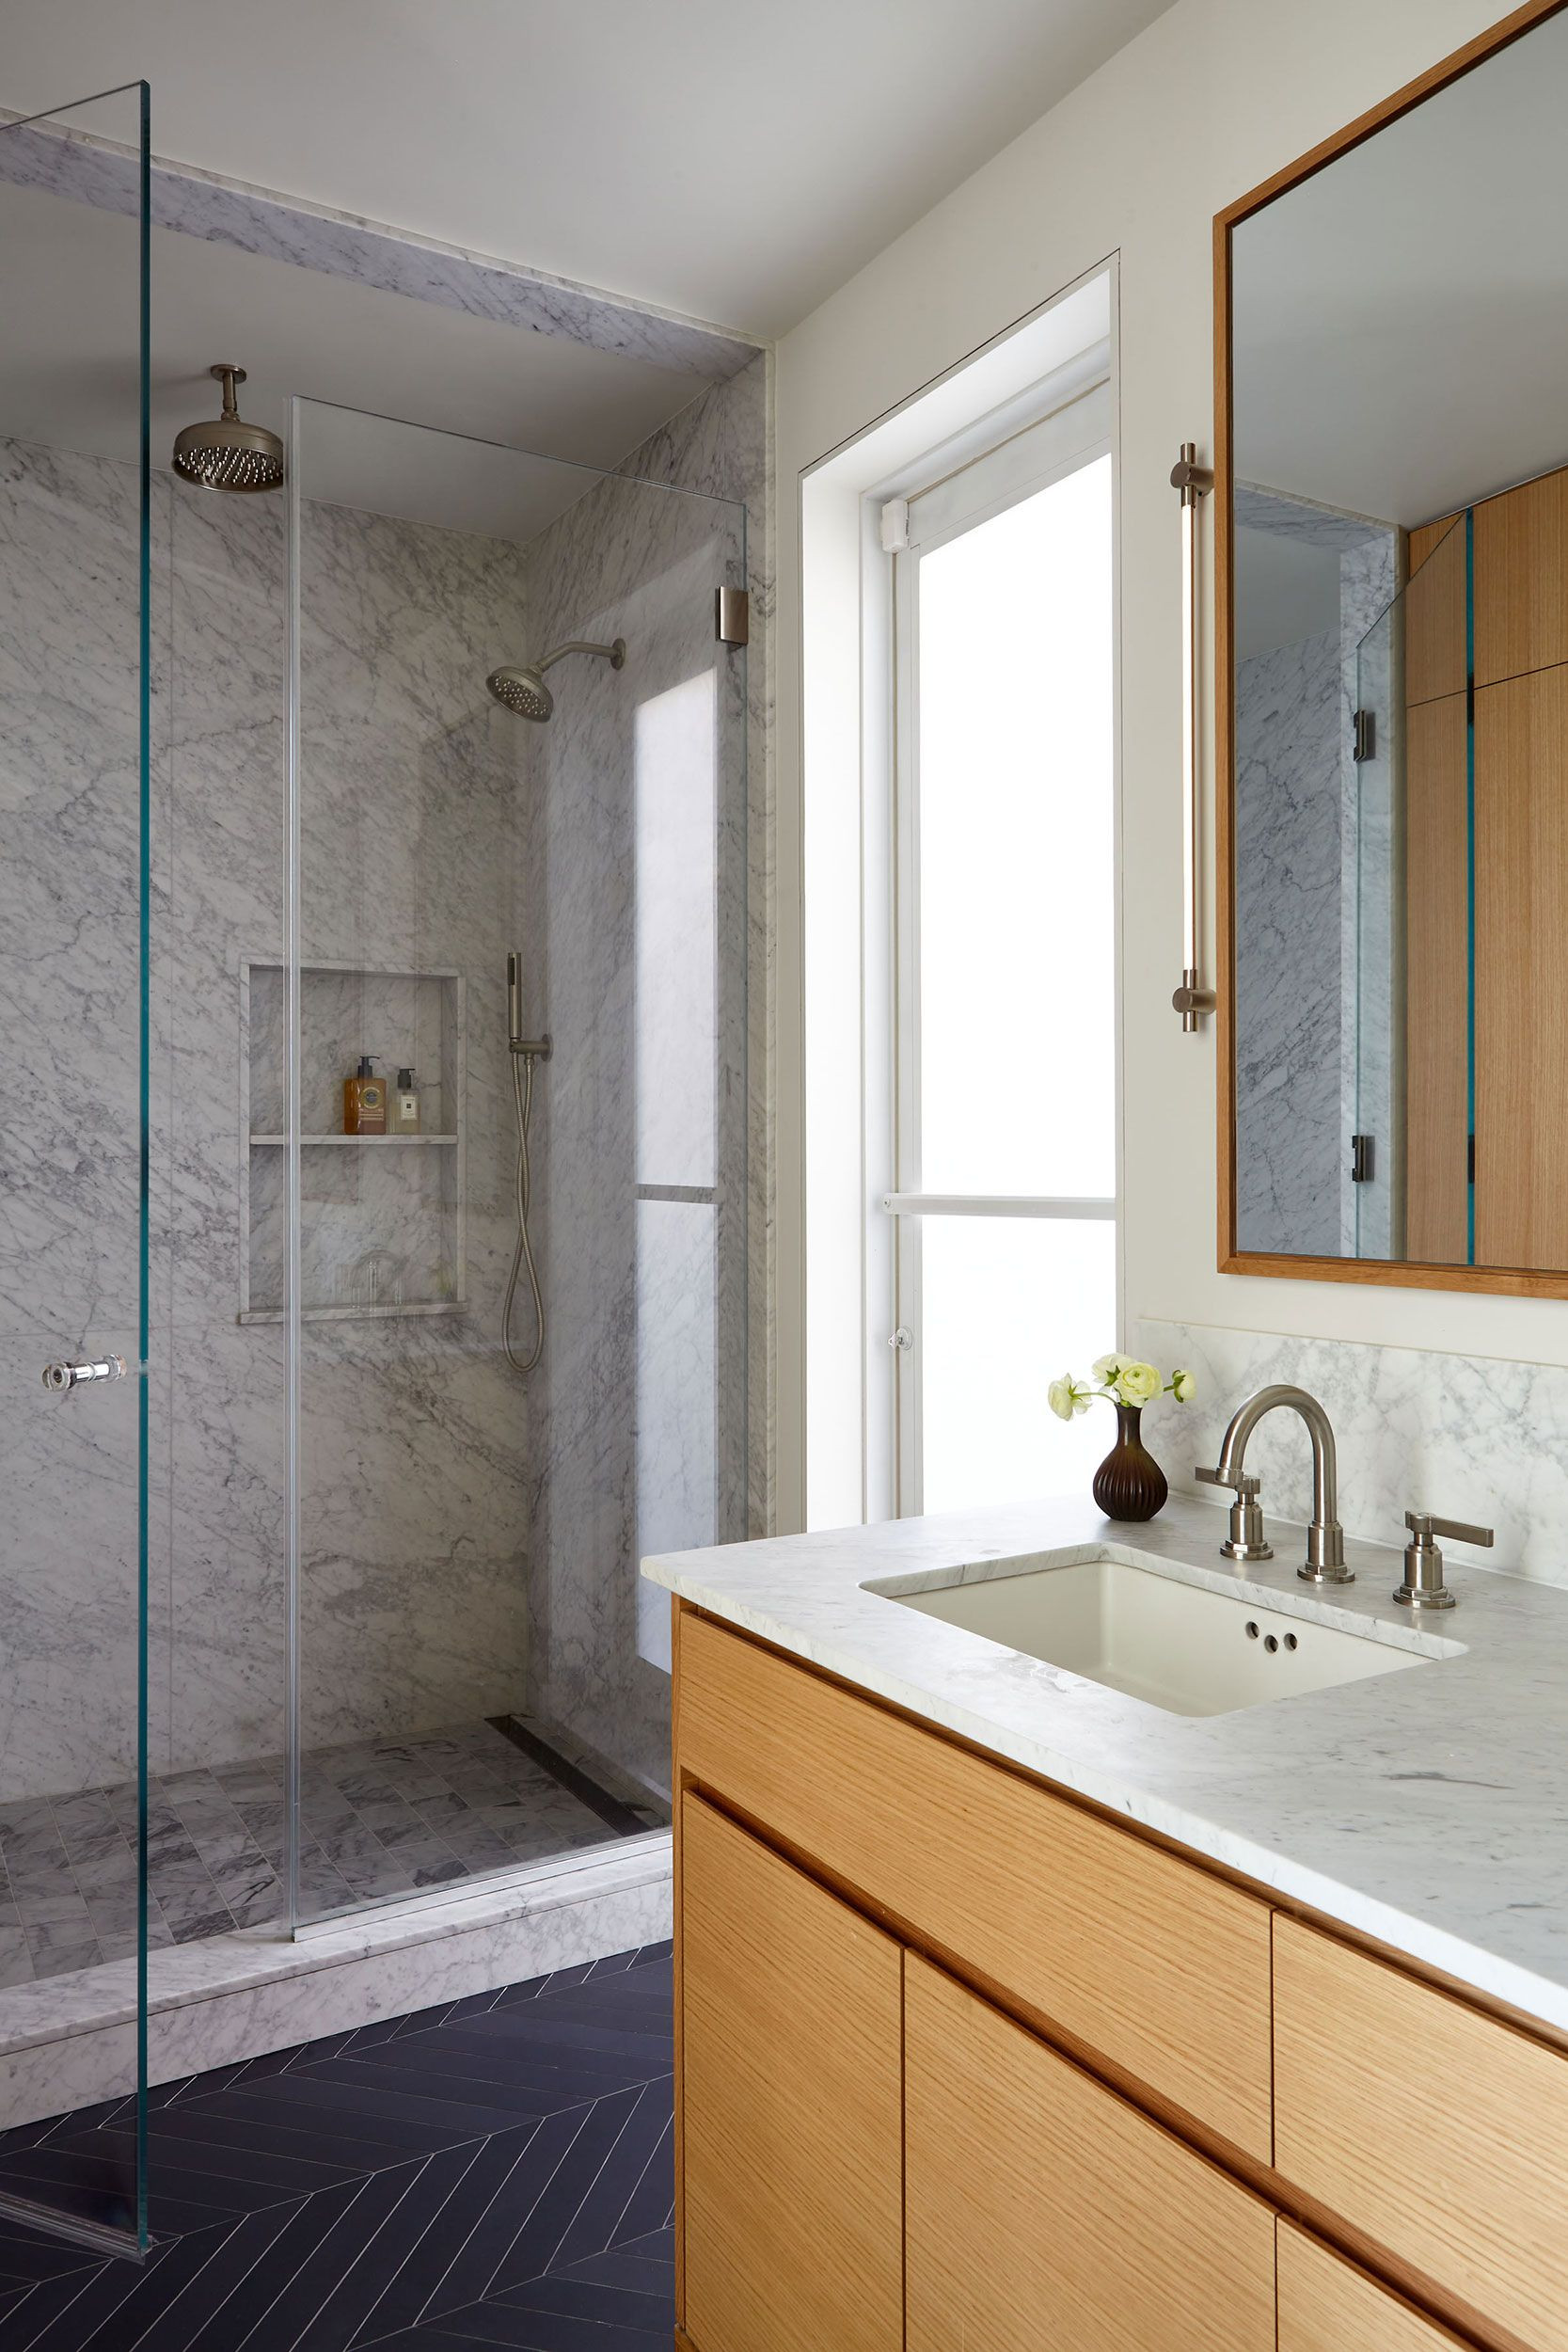 Walk-in Shower Ideas that Are Dripping in Glamour